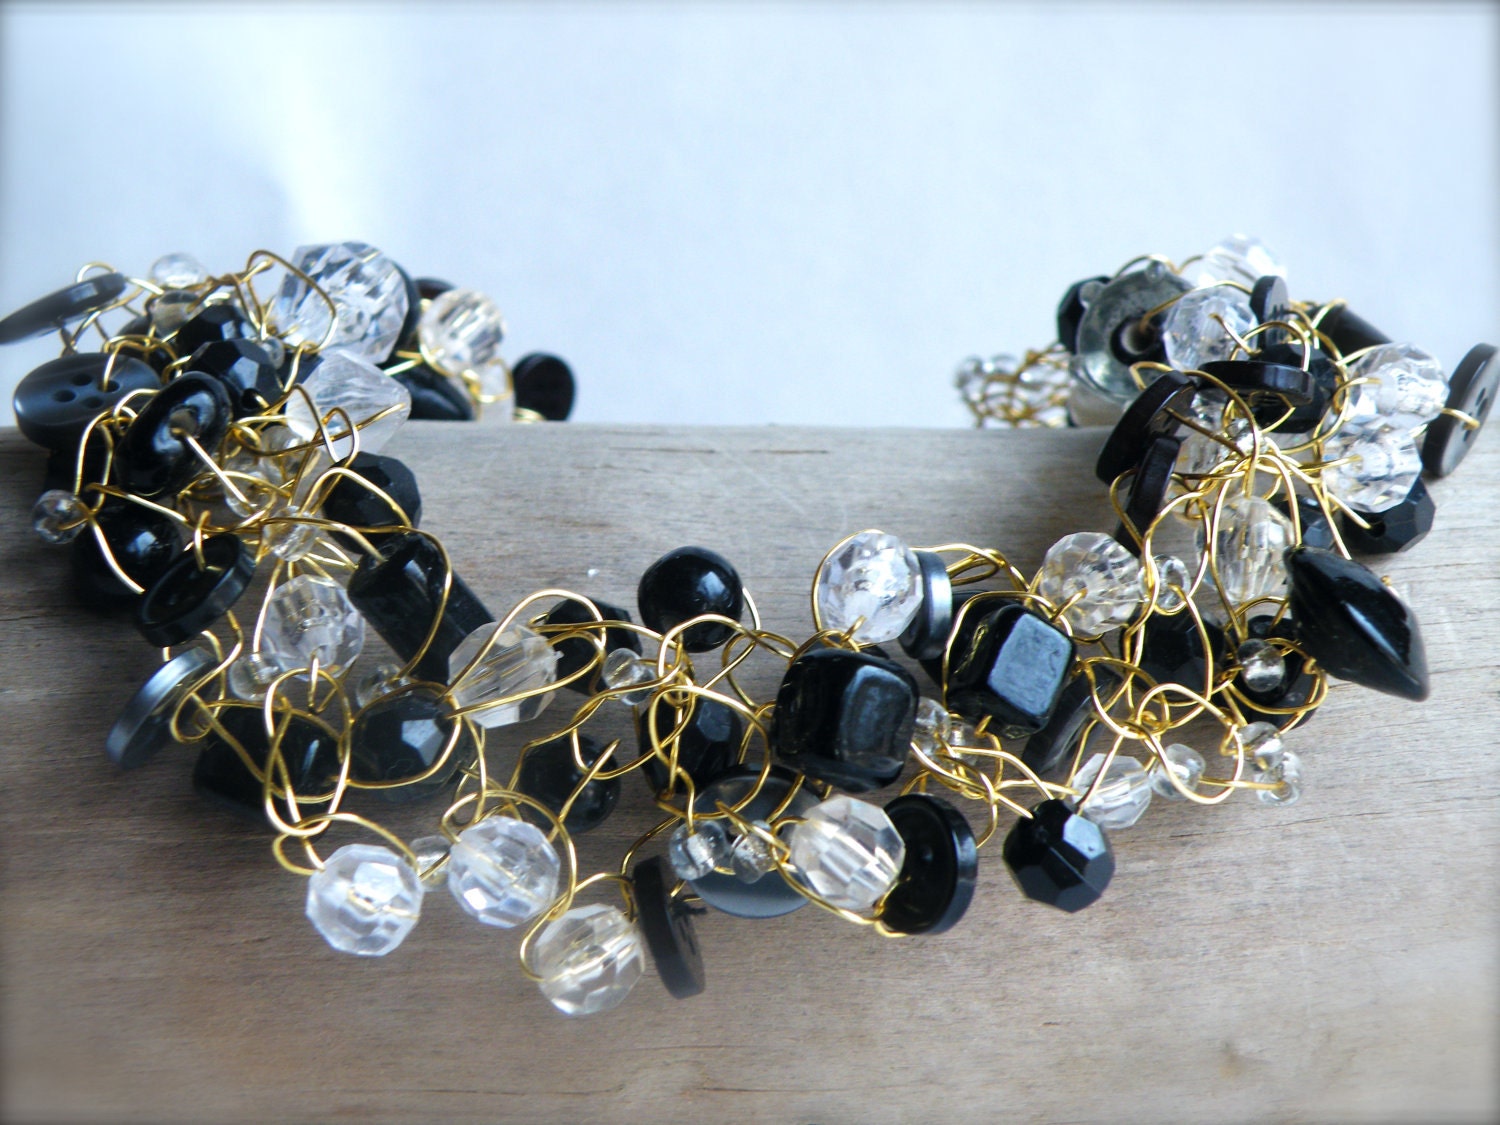 Black Button Crochet Wire Necklace... Crystal Droplets & Assorted Black Beads on Gold Wire (Free Shipping)